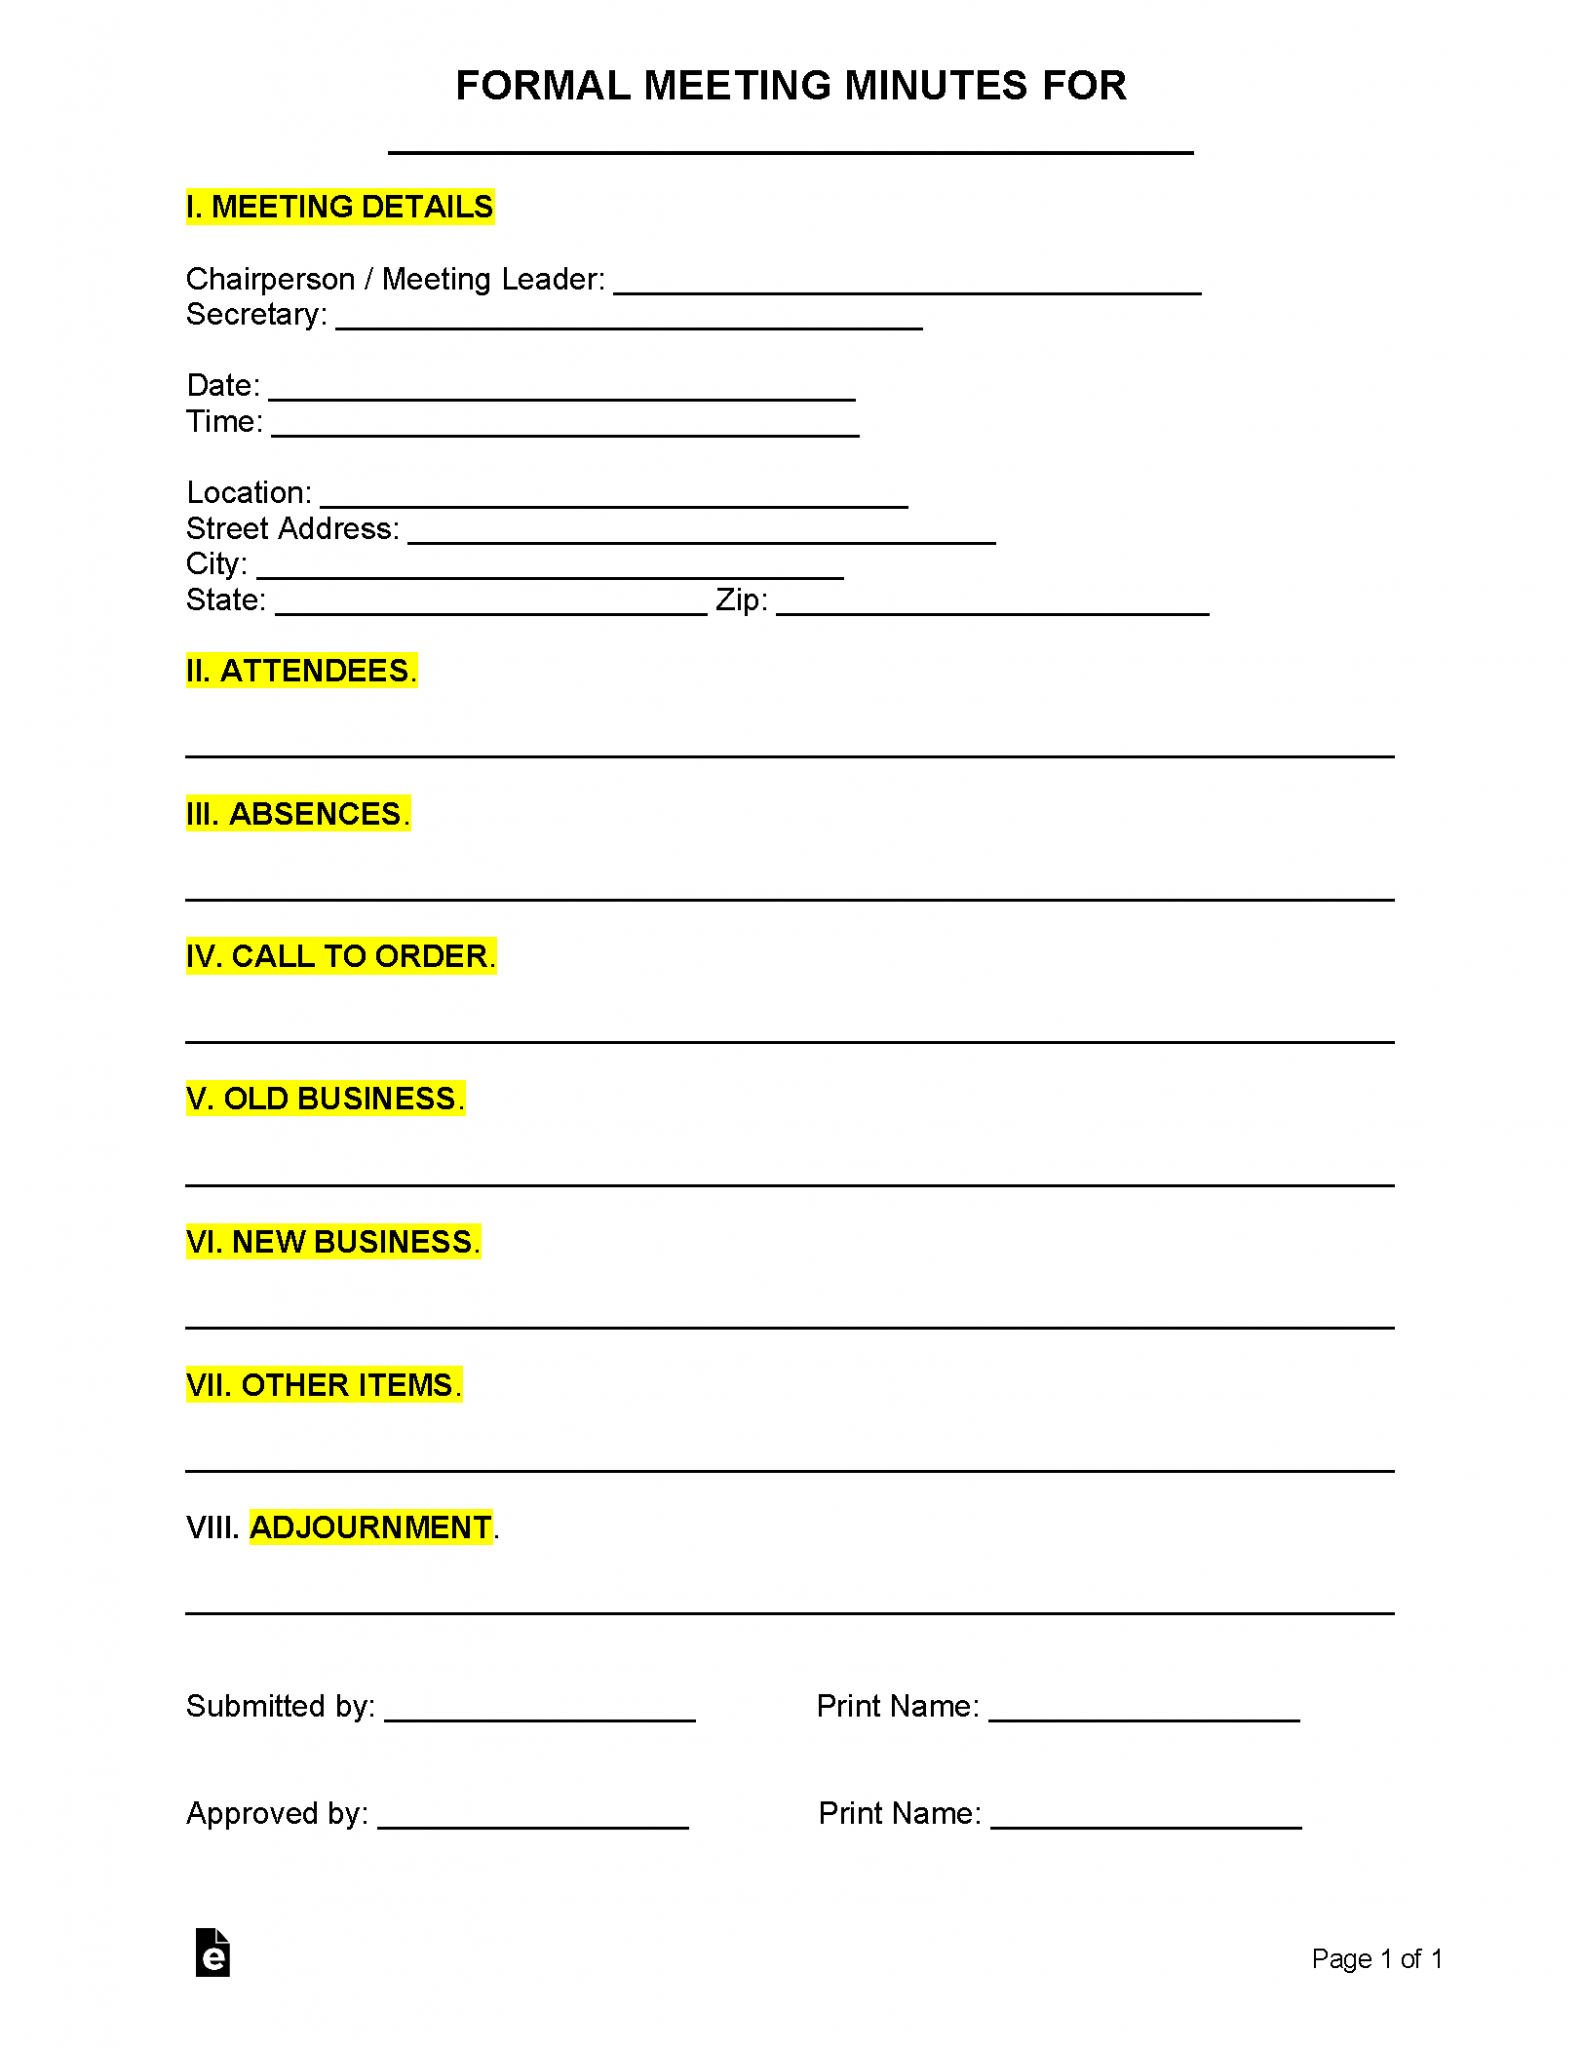 Free Meeting Minutes Template Riset